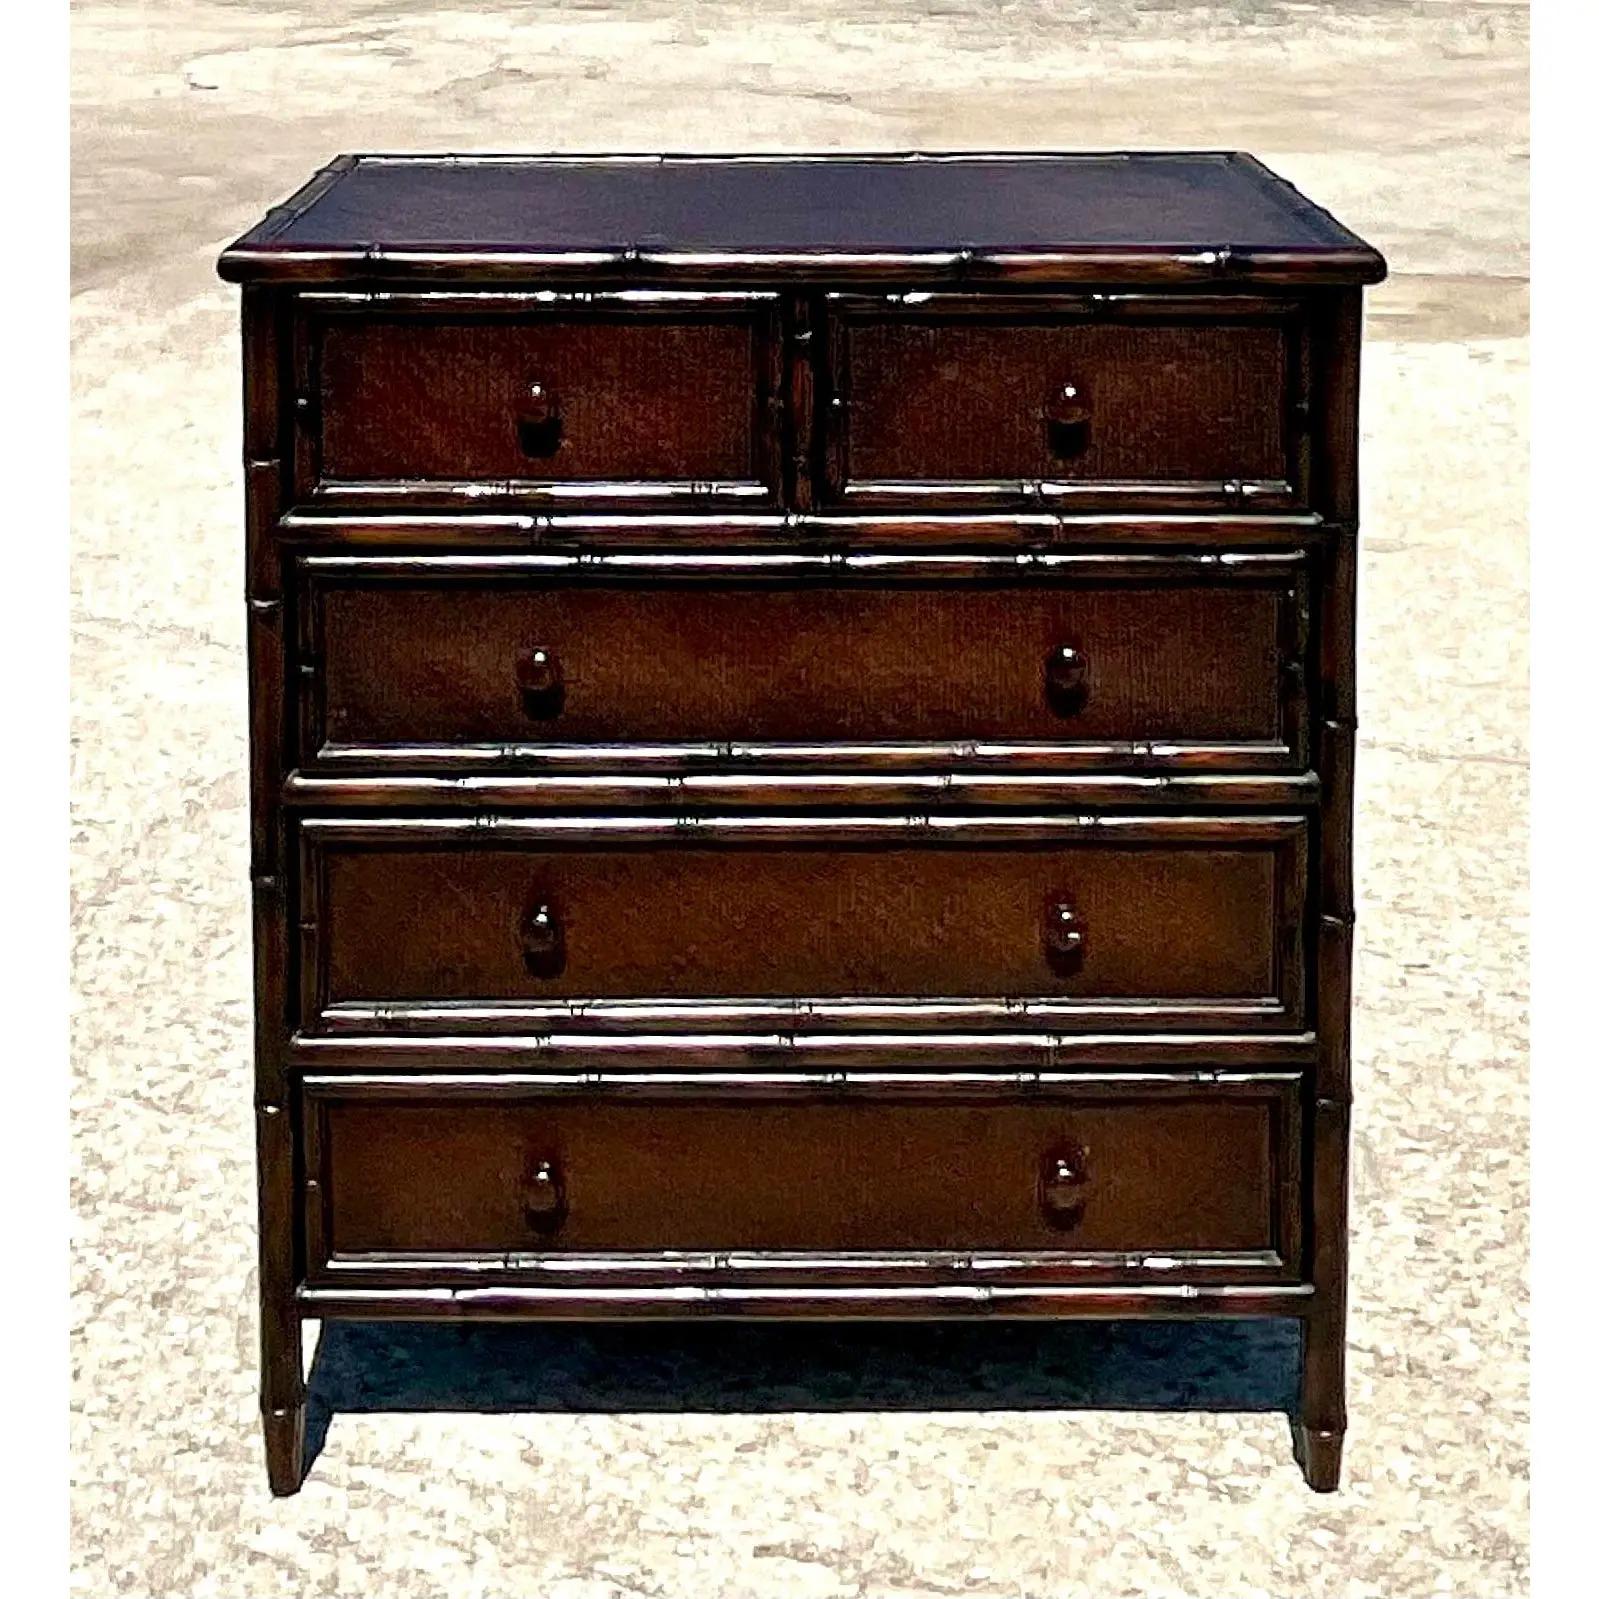 Vintage Coastal Chest of drawers. Beautiful carved dark brown bamboo with inset woven rattan panels. Acquired from a Palm Beach estate.